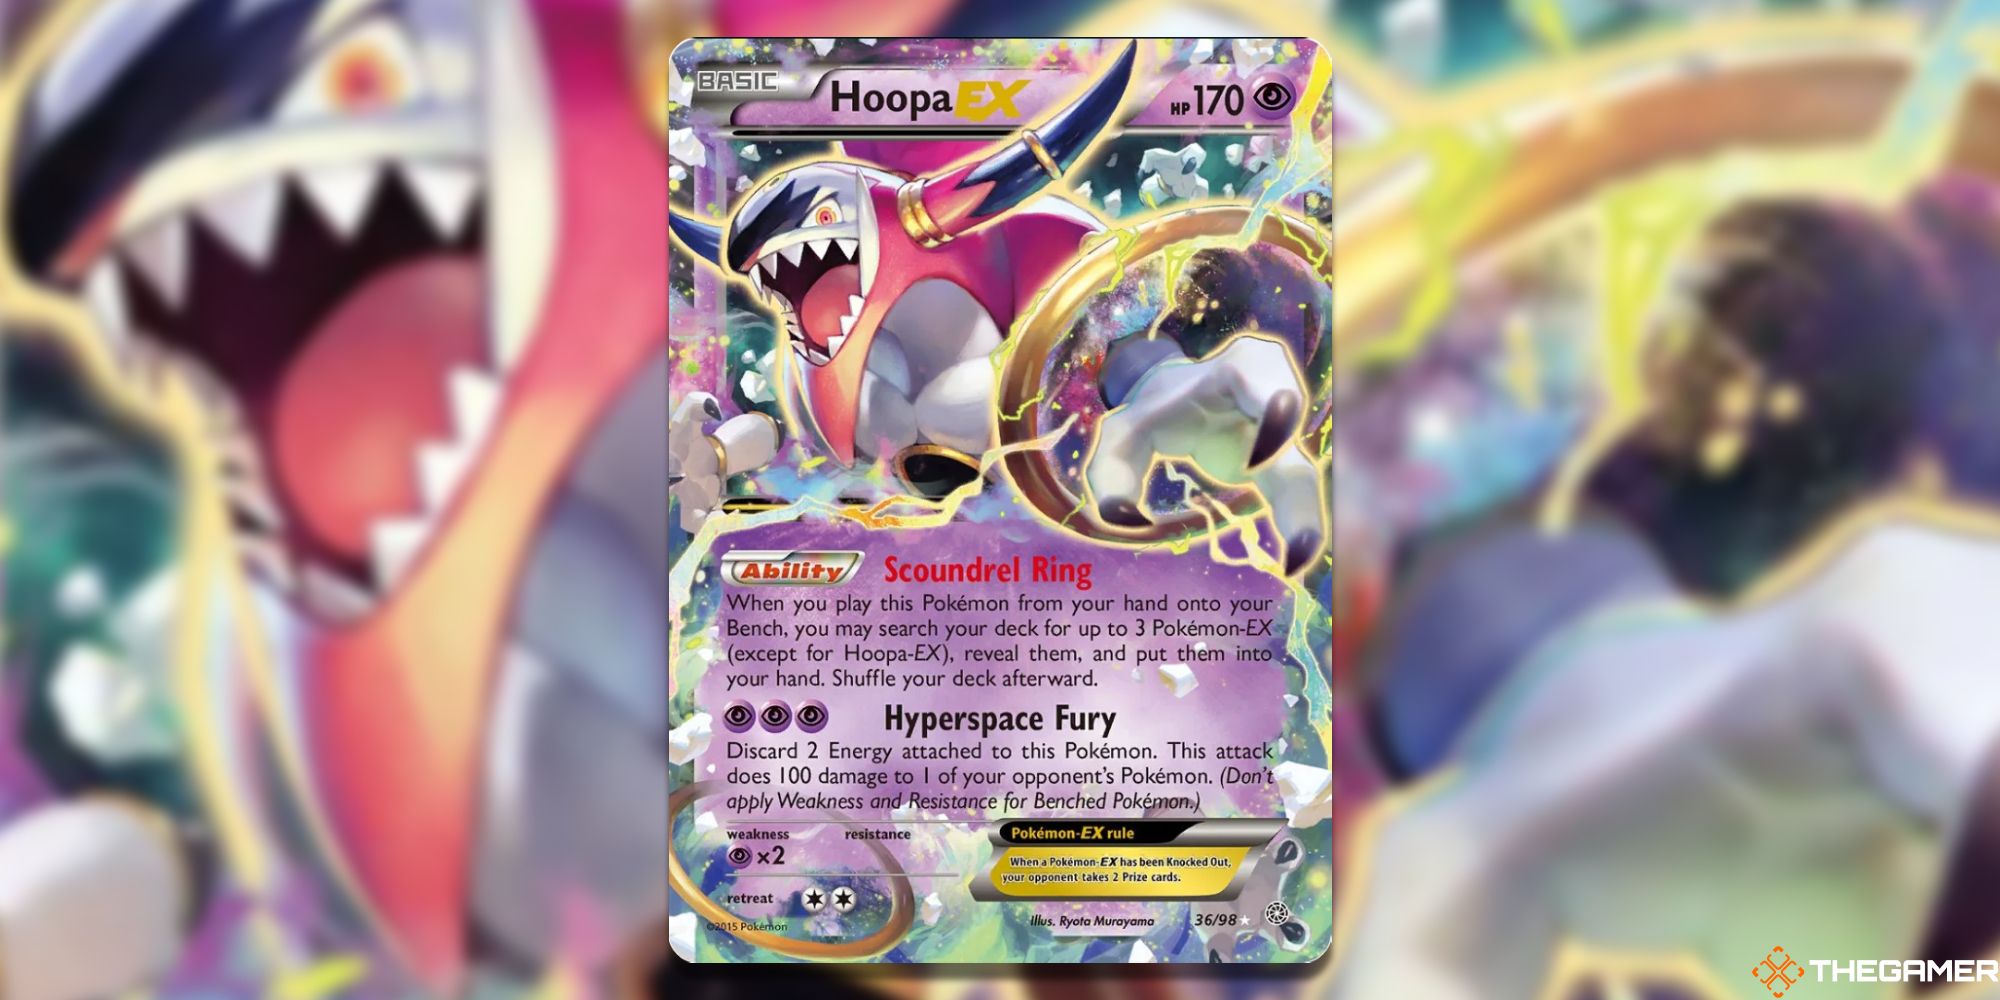 Hoopa-EX from Ancient Origins Card Art with blurred background